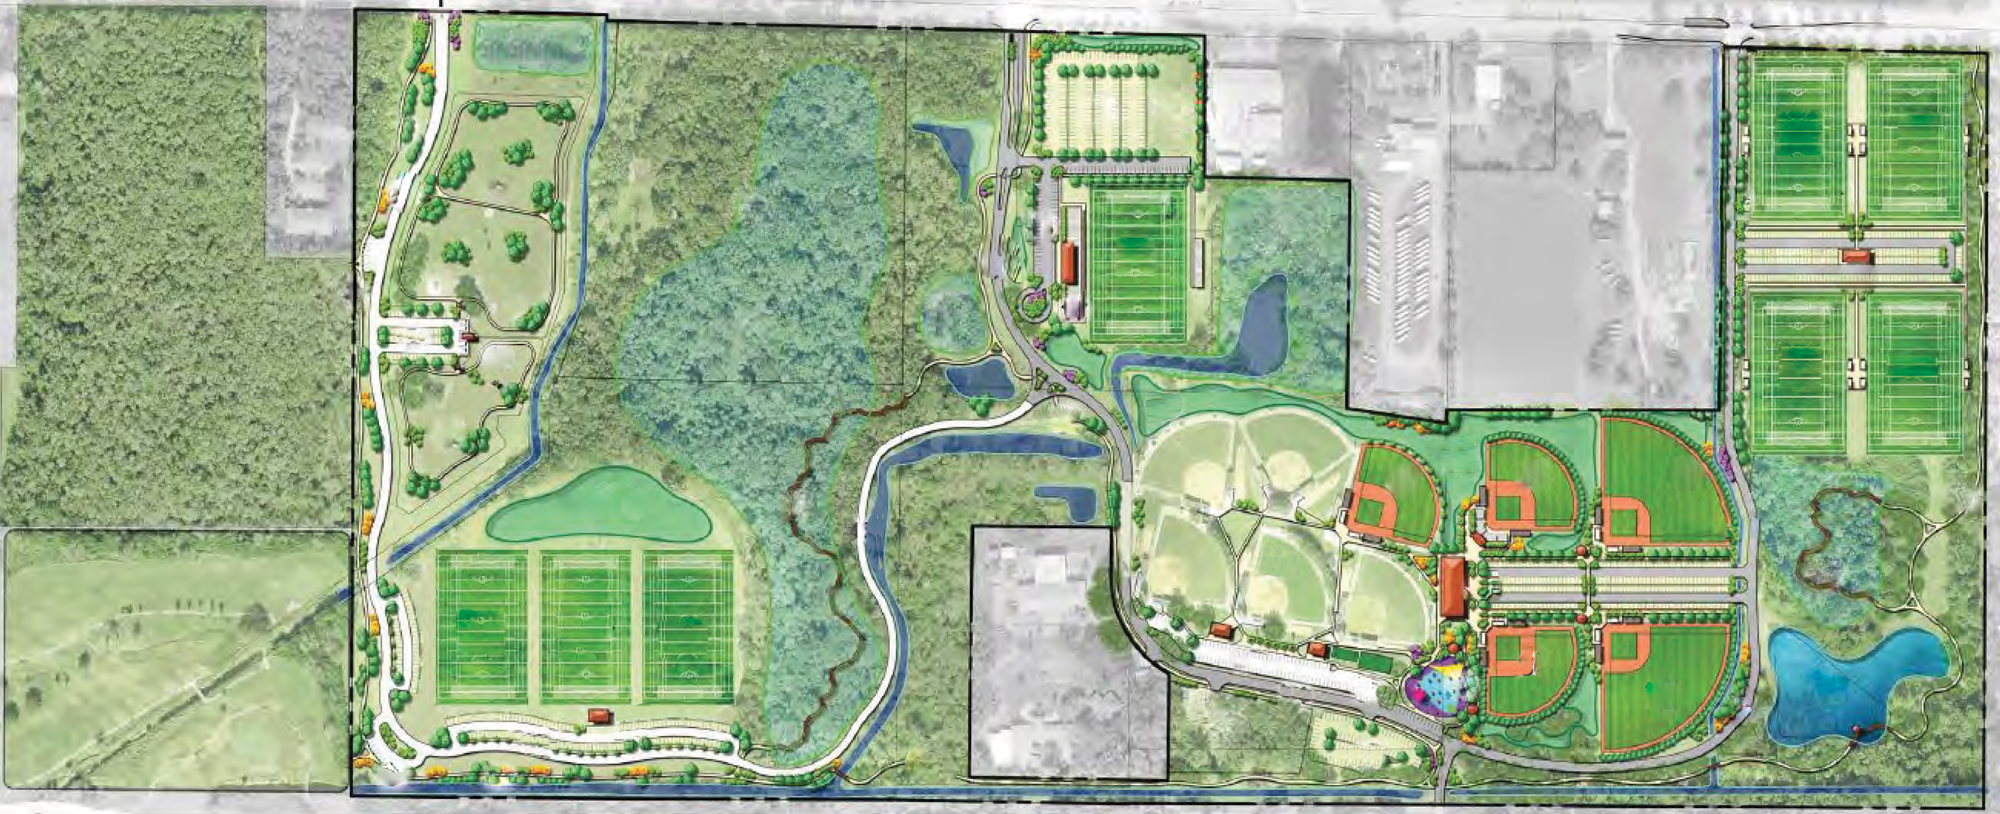 Proposed changes to 17th Street Park would include additional acreage and a remake of baseball, softball, soccer and football fields.